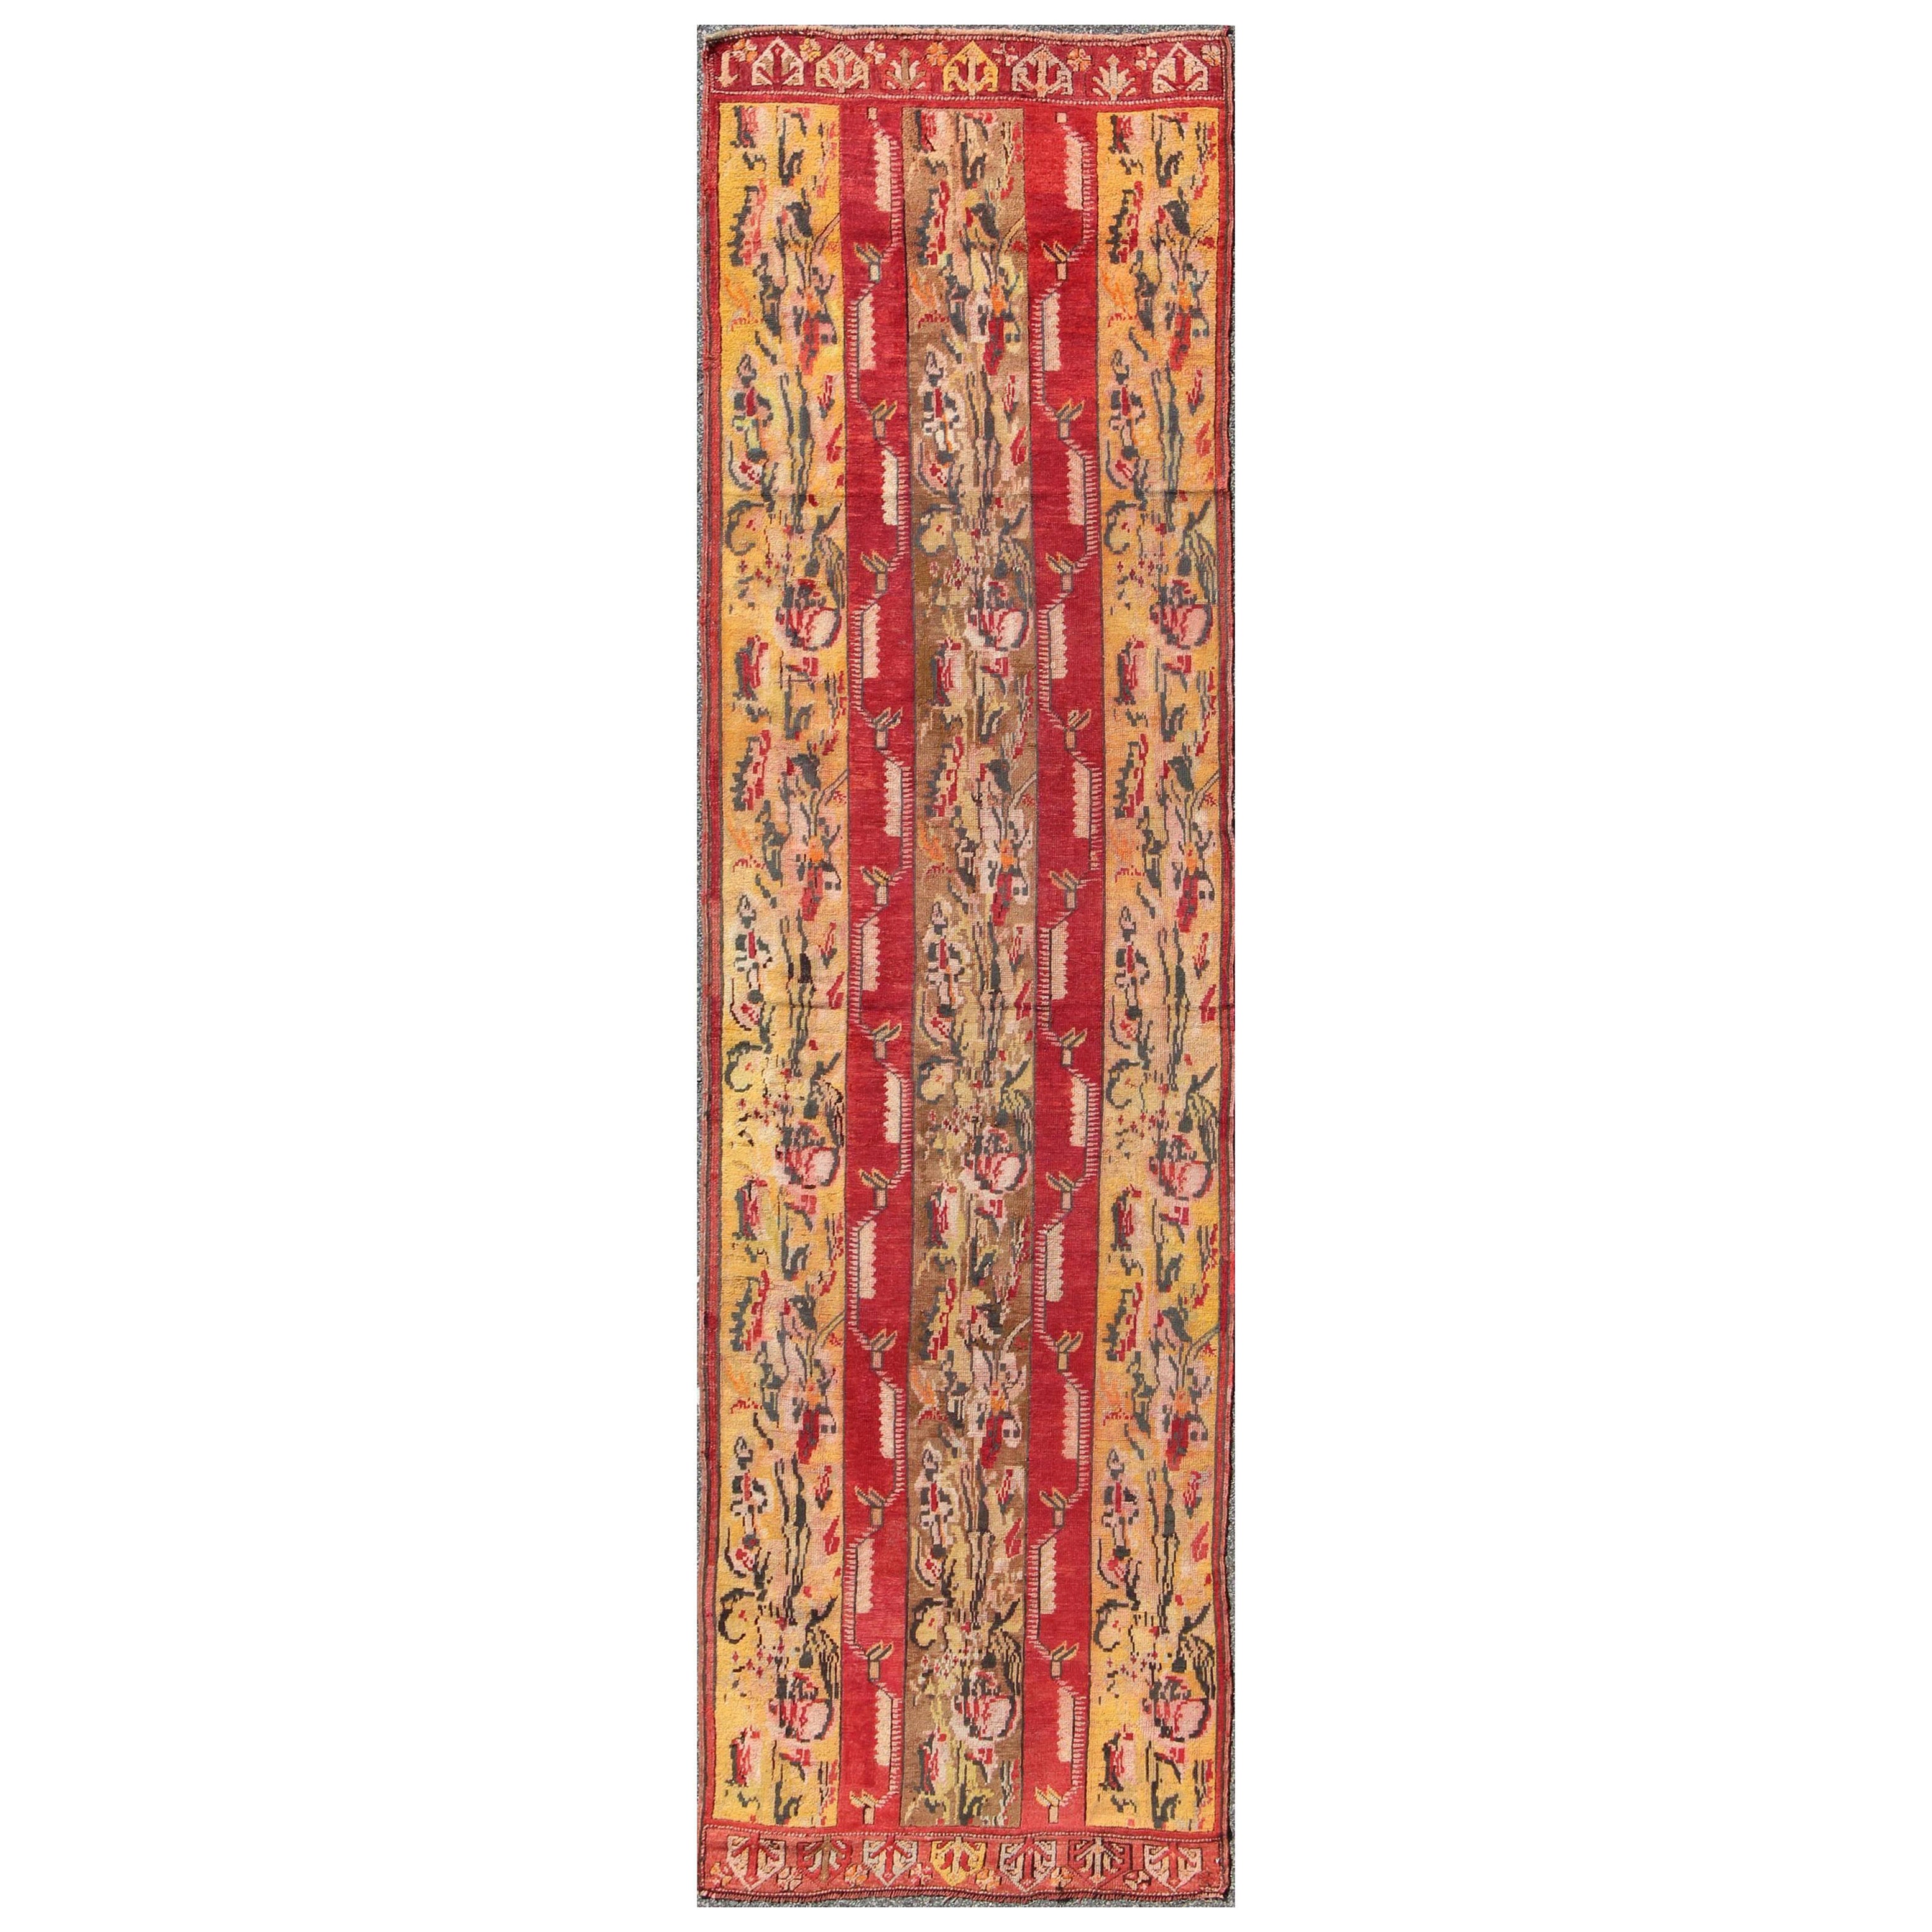 Antique Turkish Oushak Runner with Saffron Yellow, Light Brown and Red 